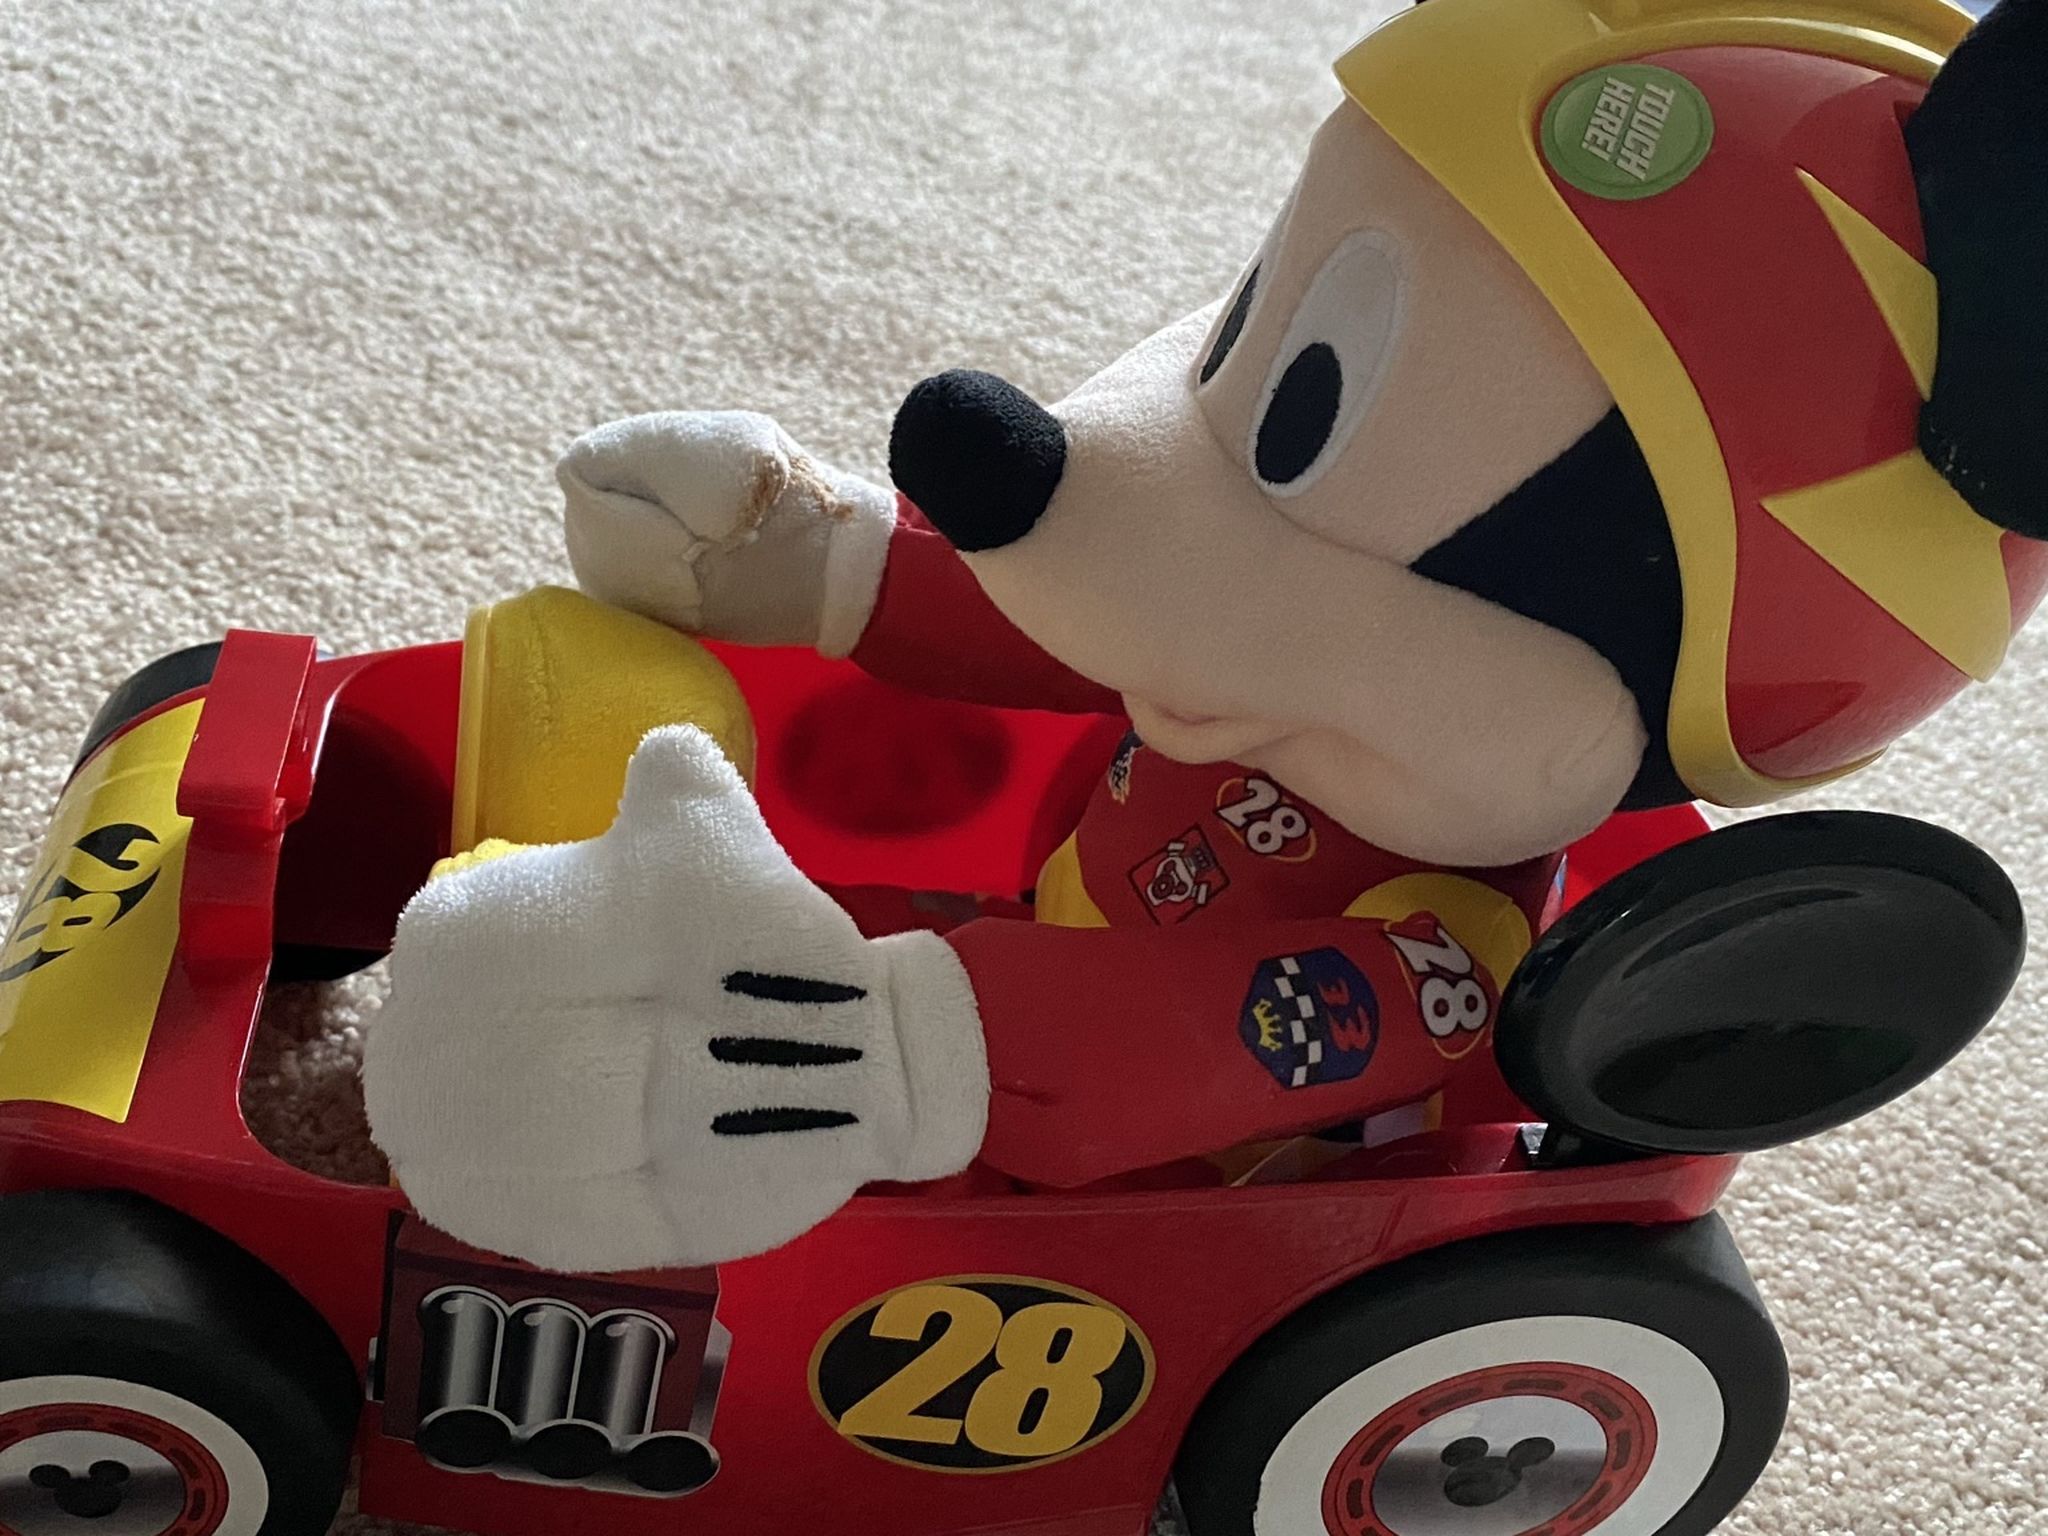 Mickey and the Roadster Racers Racing 15" Plush Mickey Plush